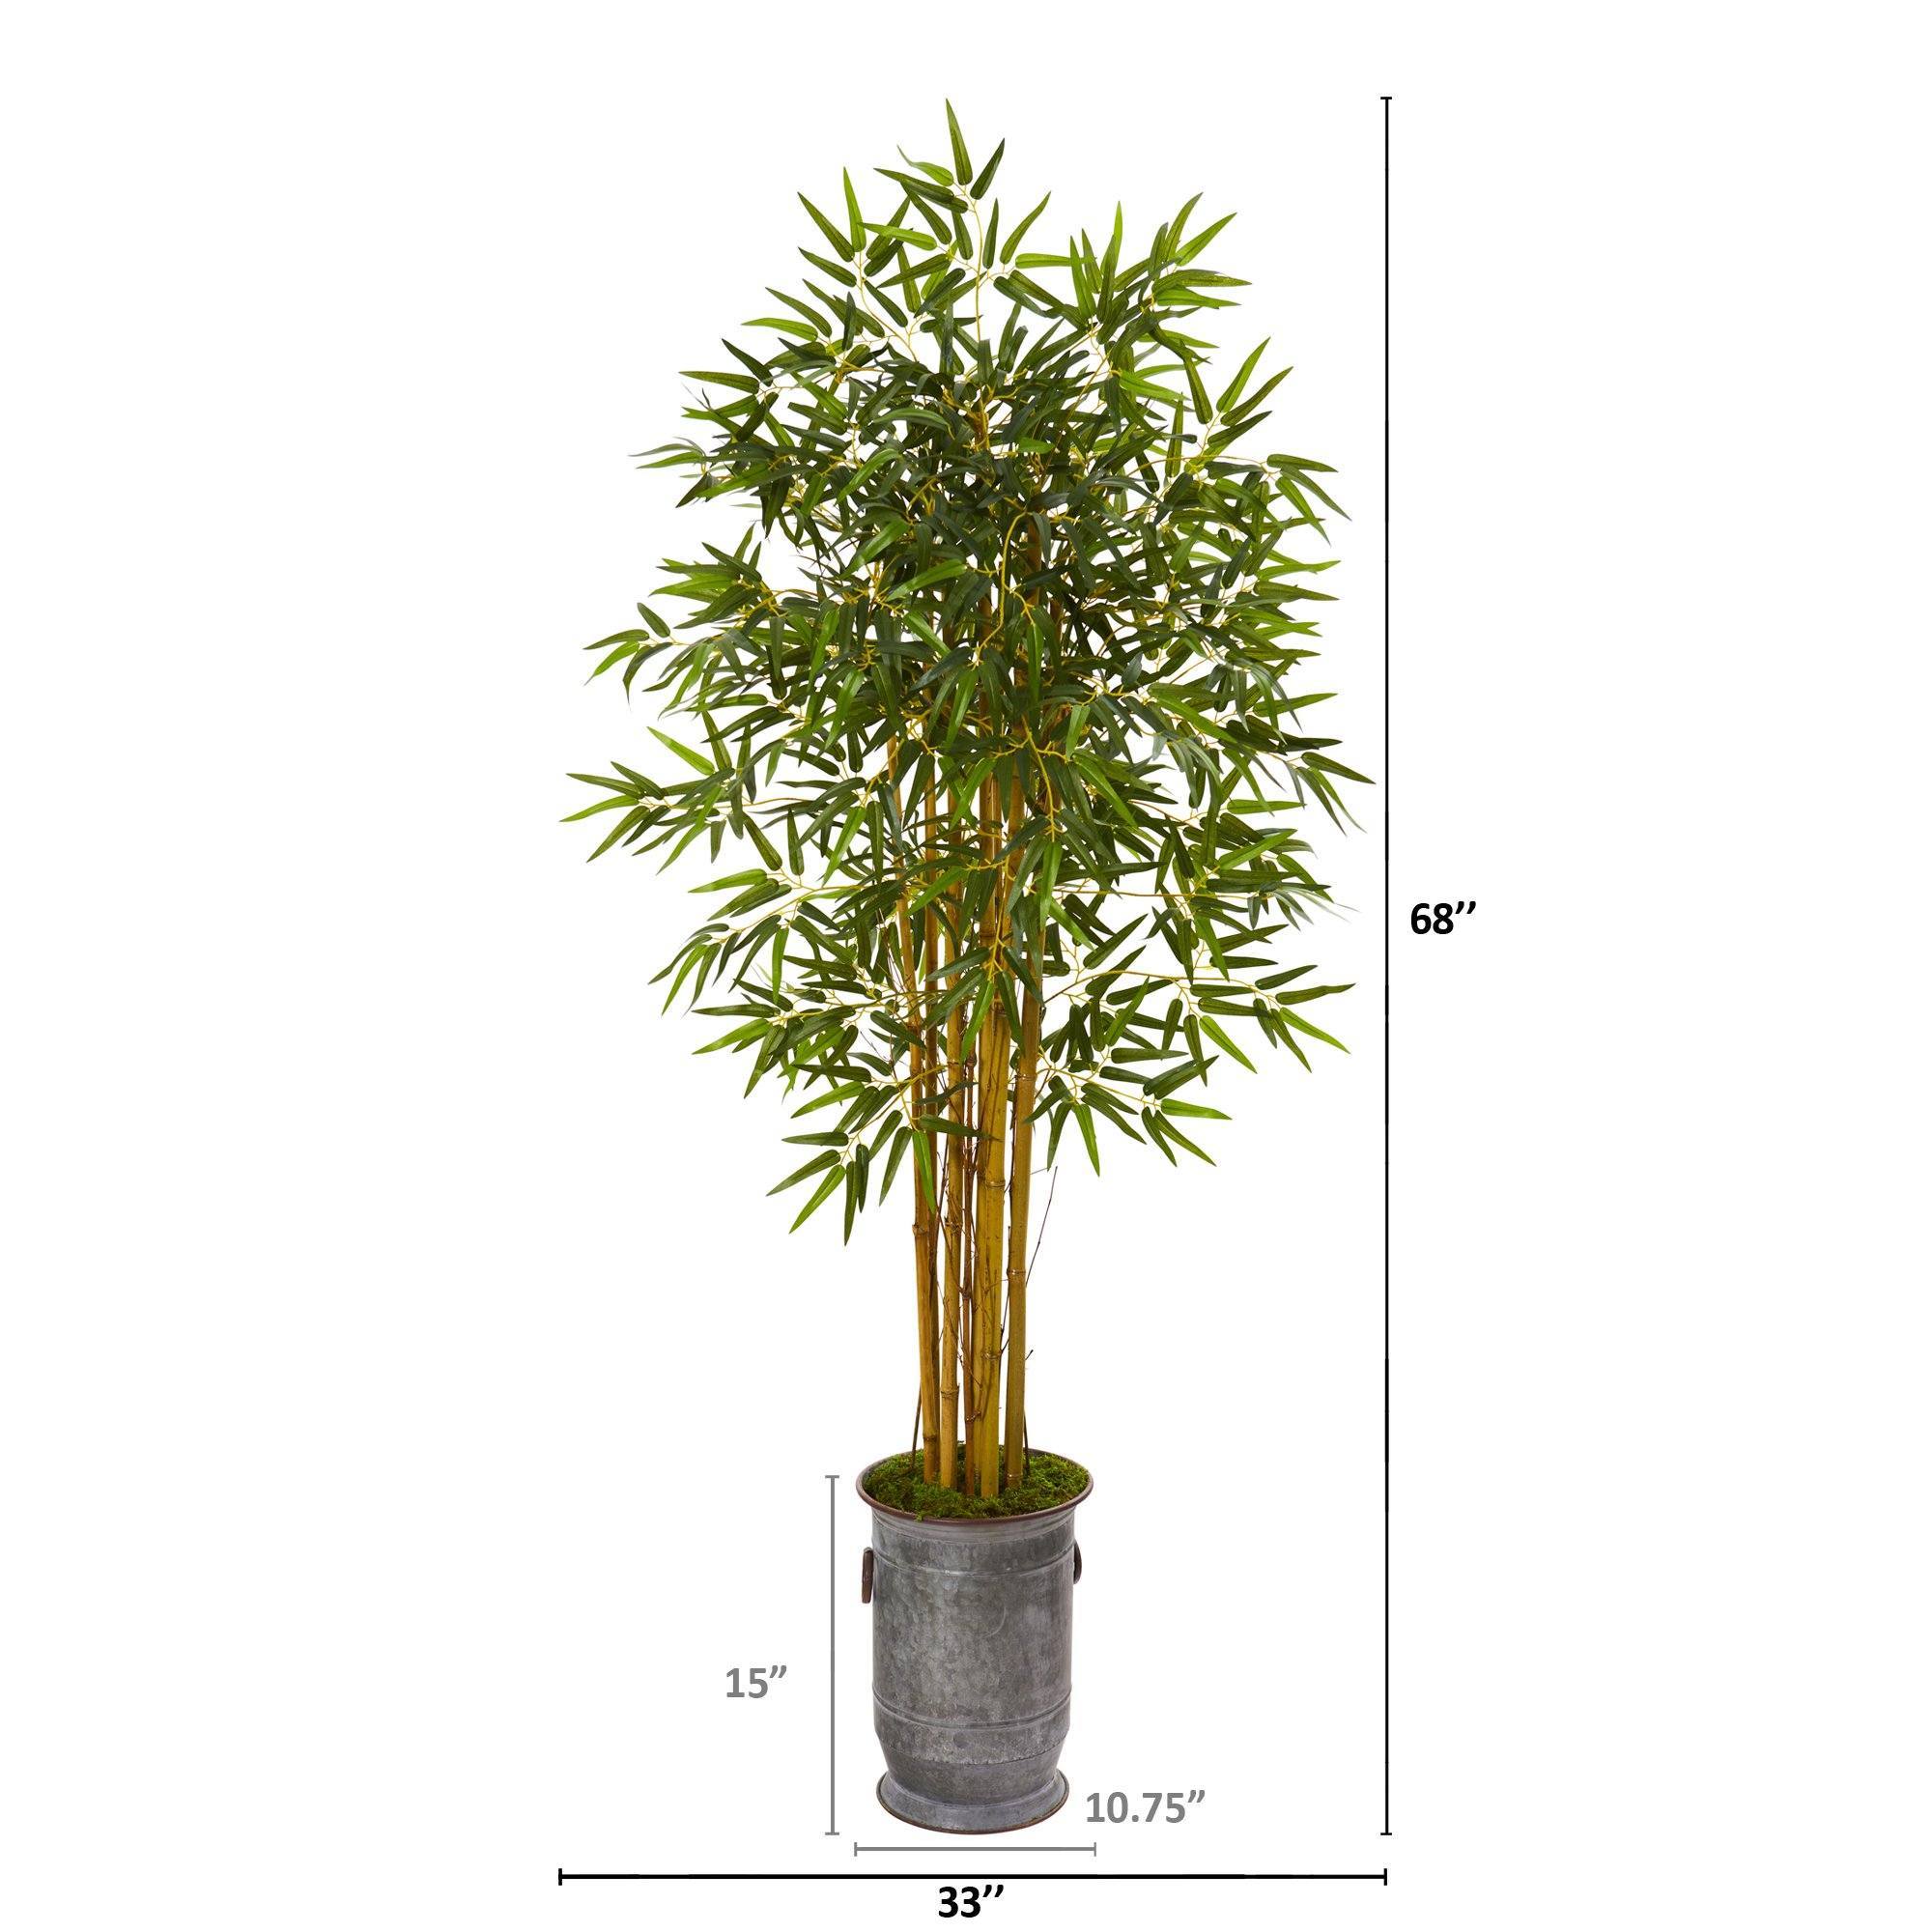 68” Bamboo Artificial Tree in Vintage Metal Planter | Nearly Natural